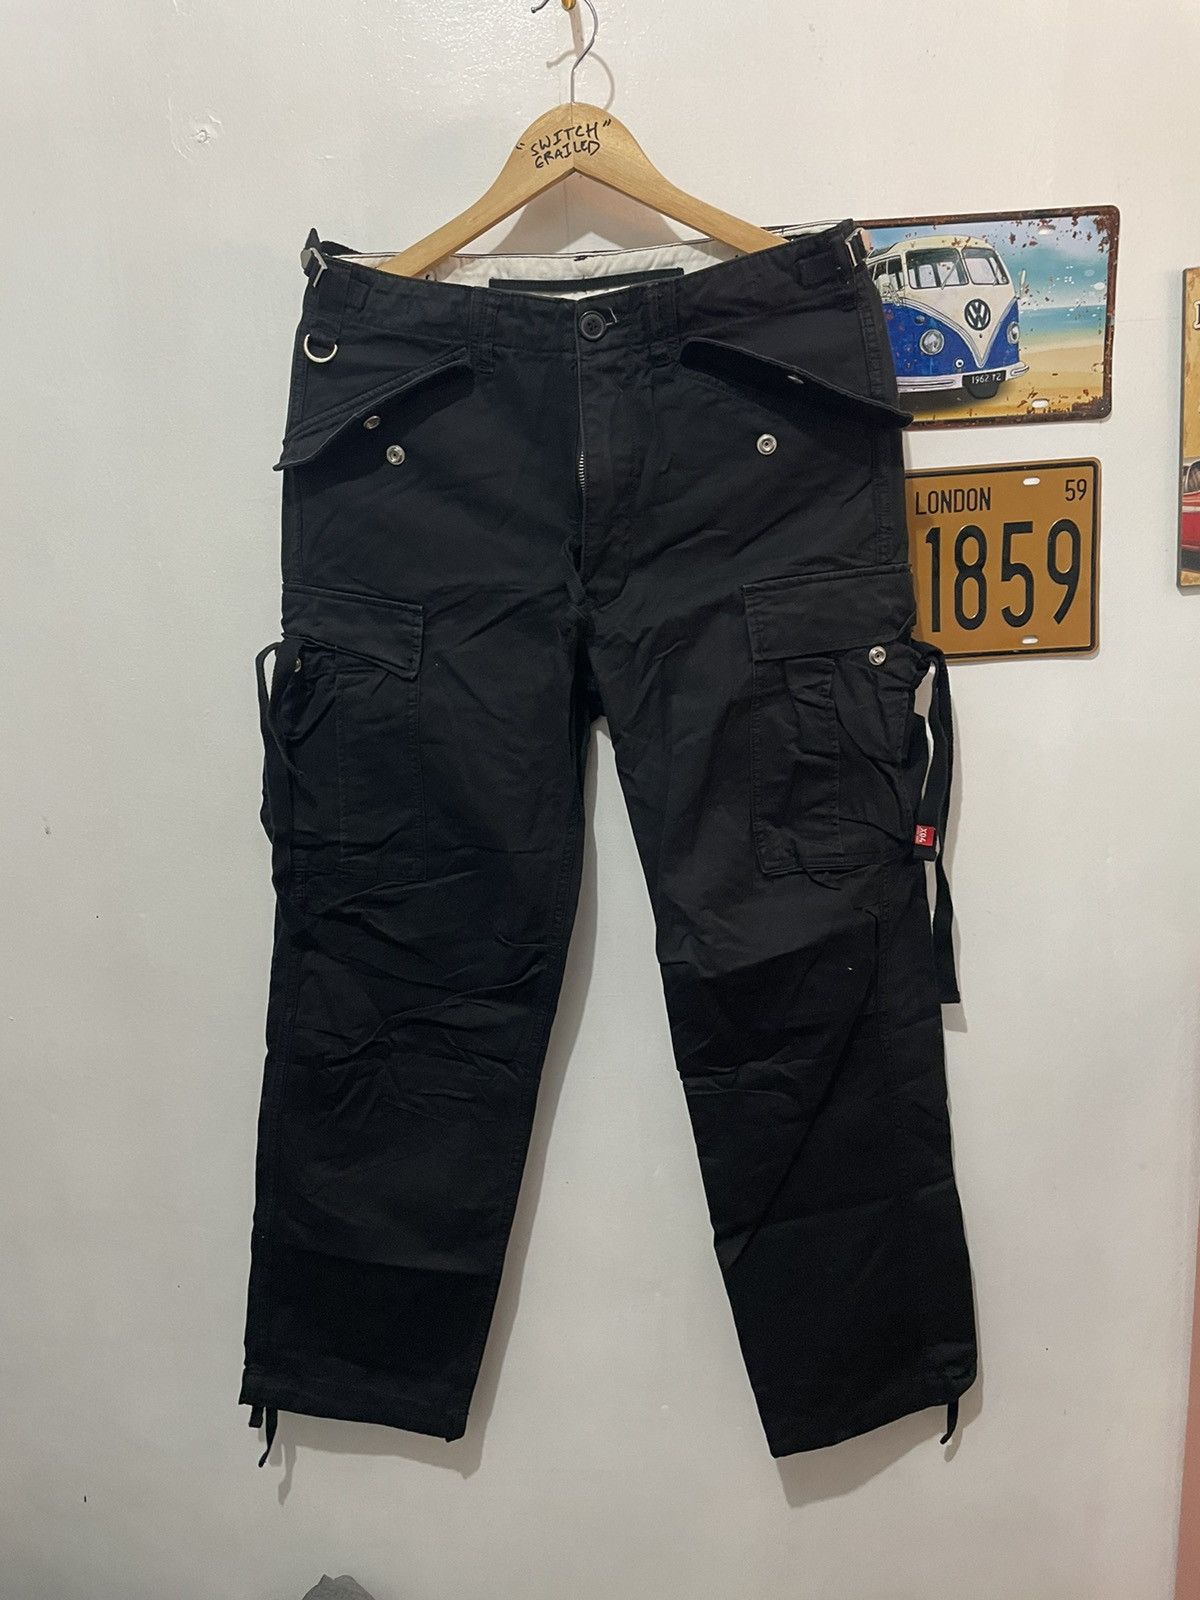 Izzue Japanese brand x izzue union made cargo pants | Grailed